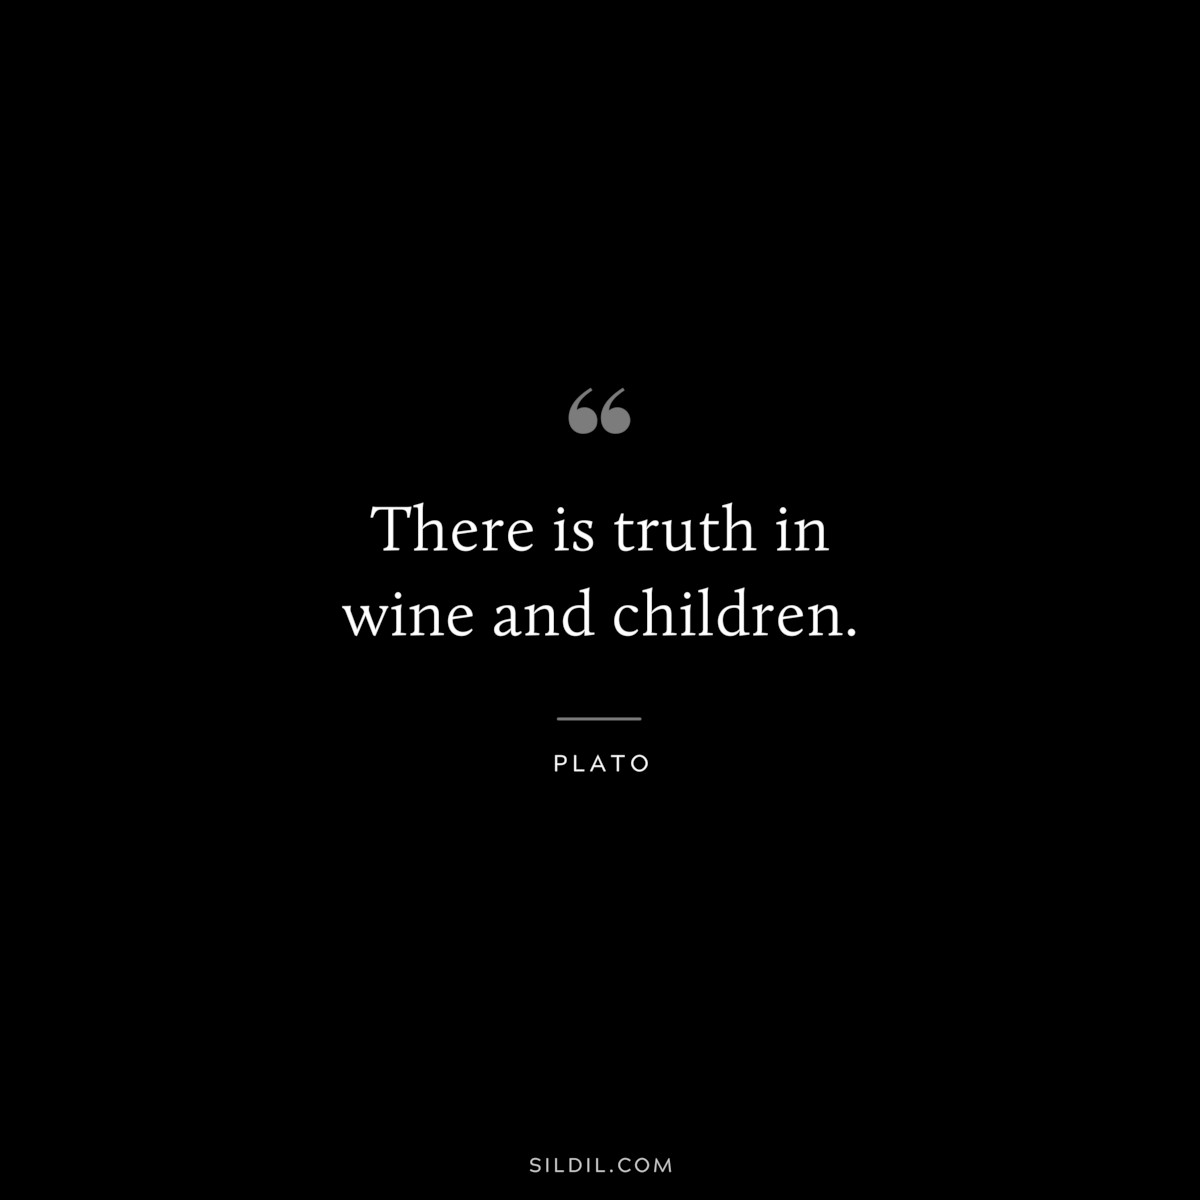 There is truth in wine and children. ― Plato